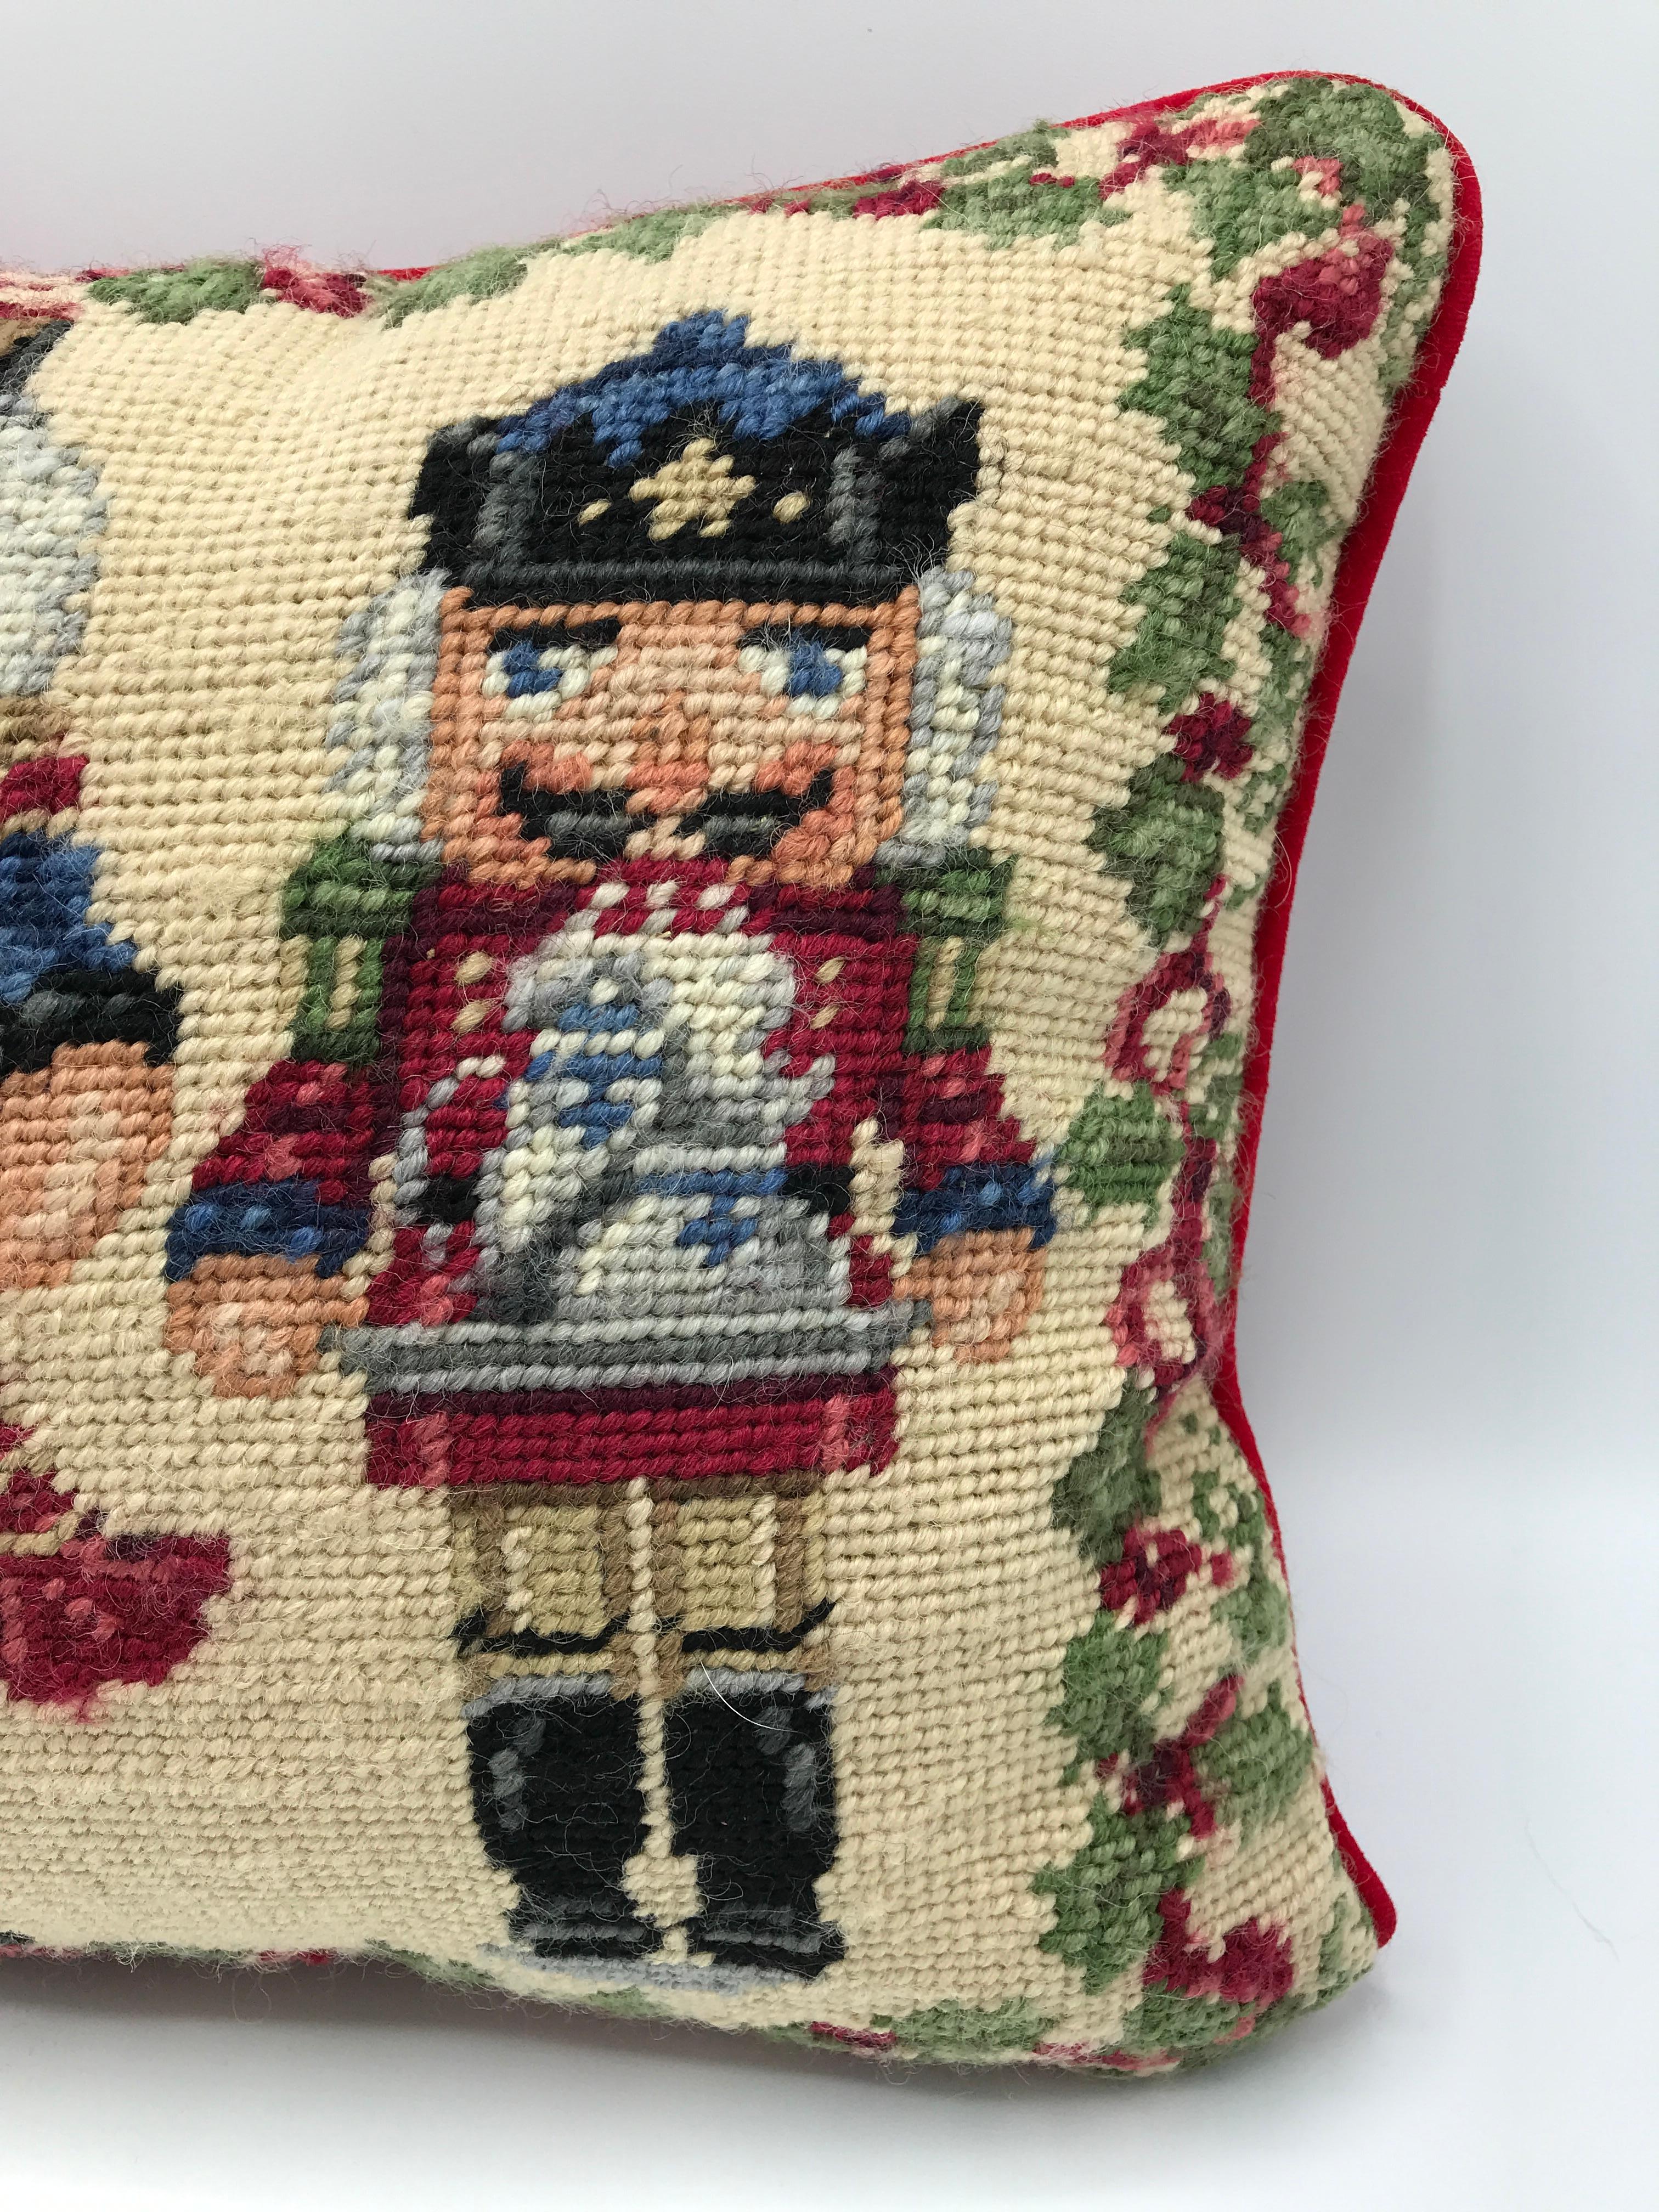 1970s Nutcracker Needlepoint Pillow In Good Condition For Sale In Richmond, VA